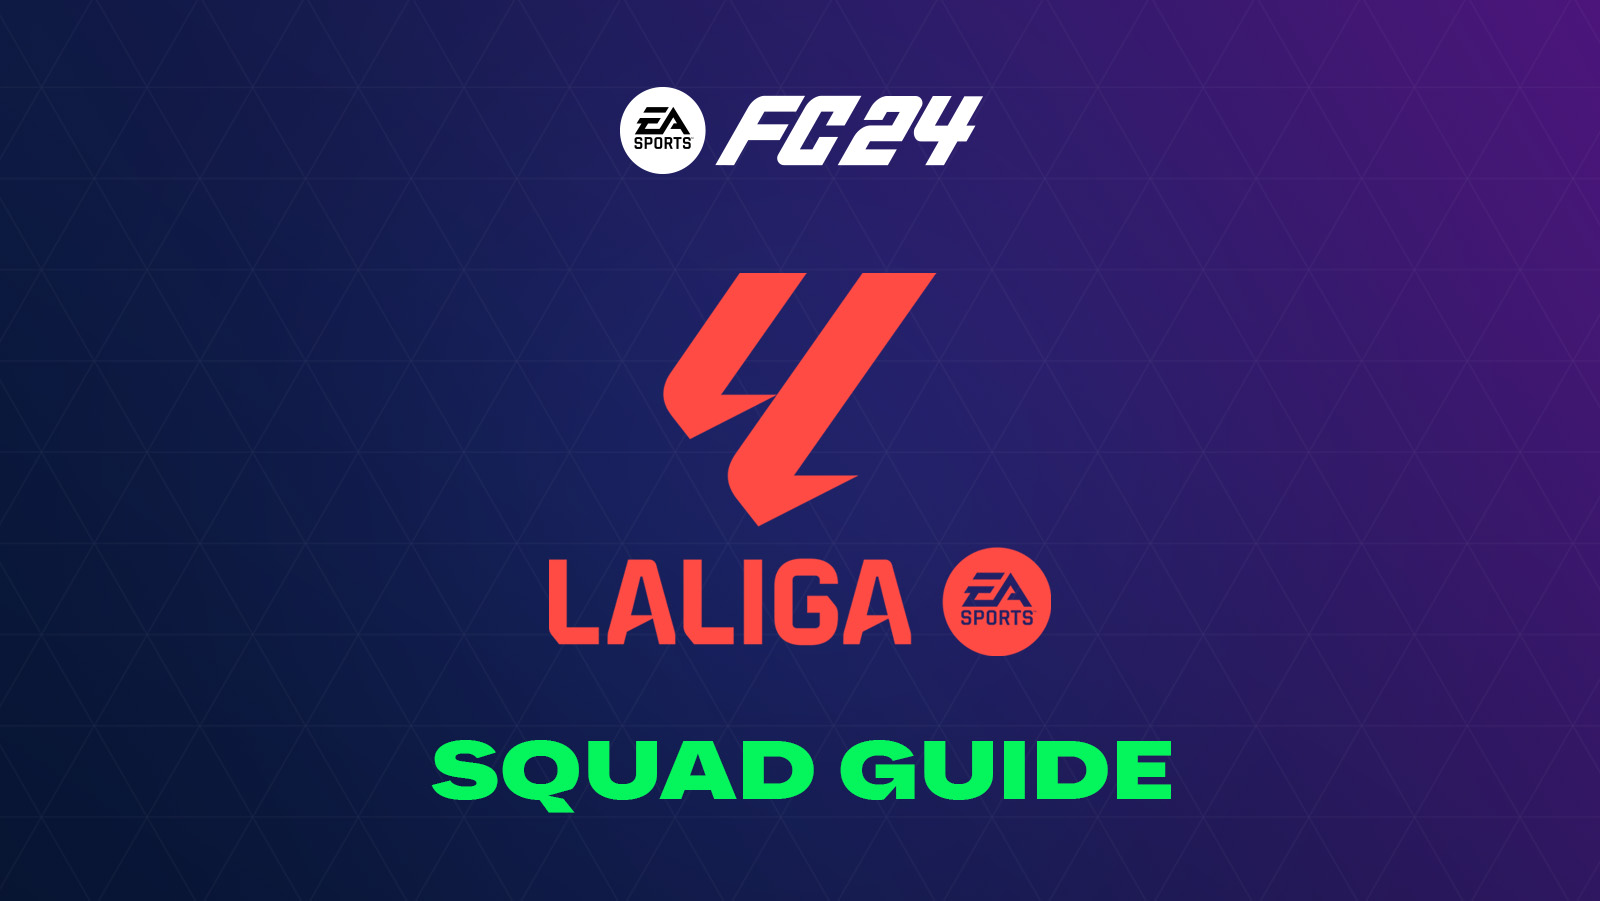 Learn how to build a LaLiga squad in EA FC 24 from a low budget to an expensive cost squad.